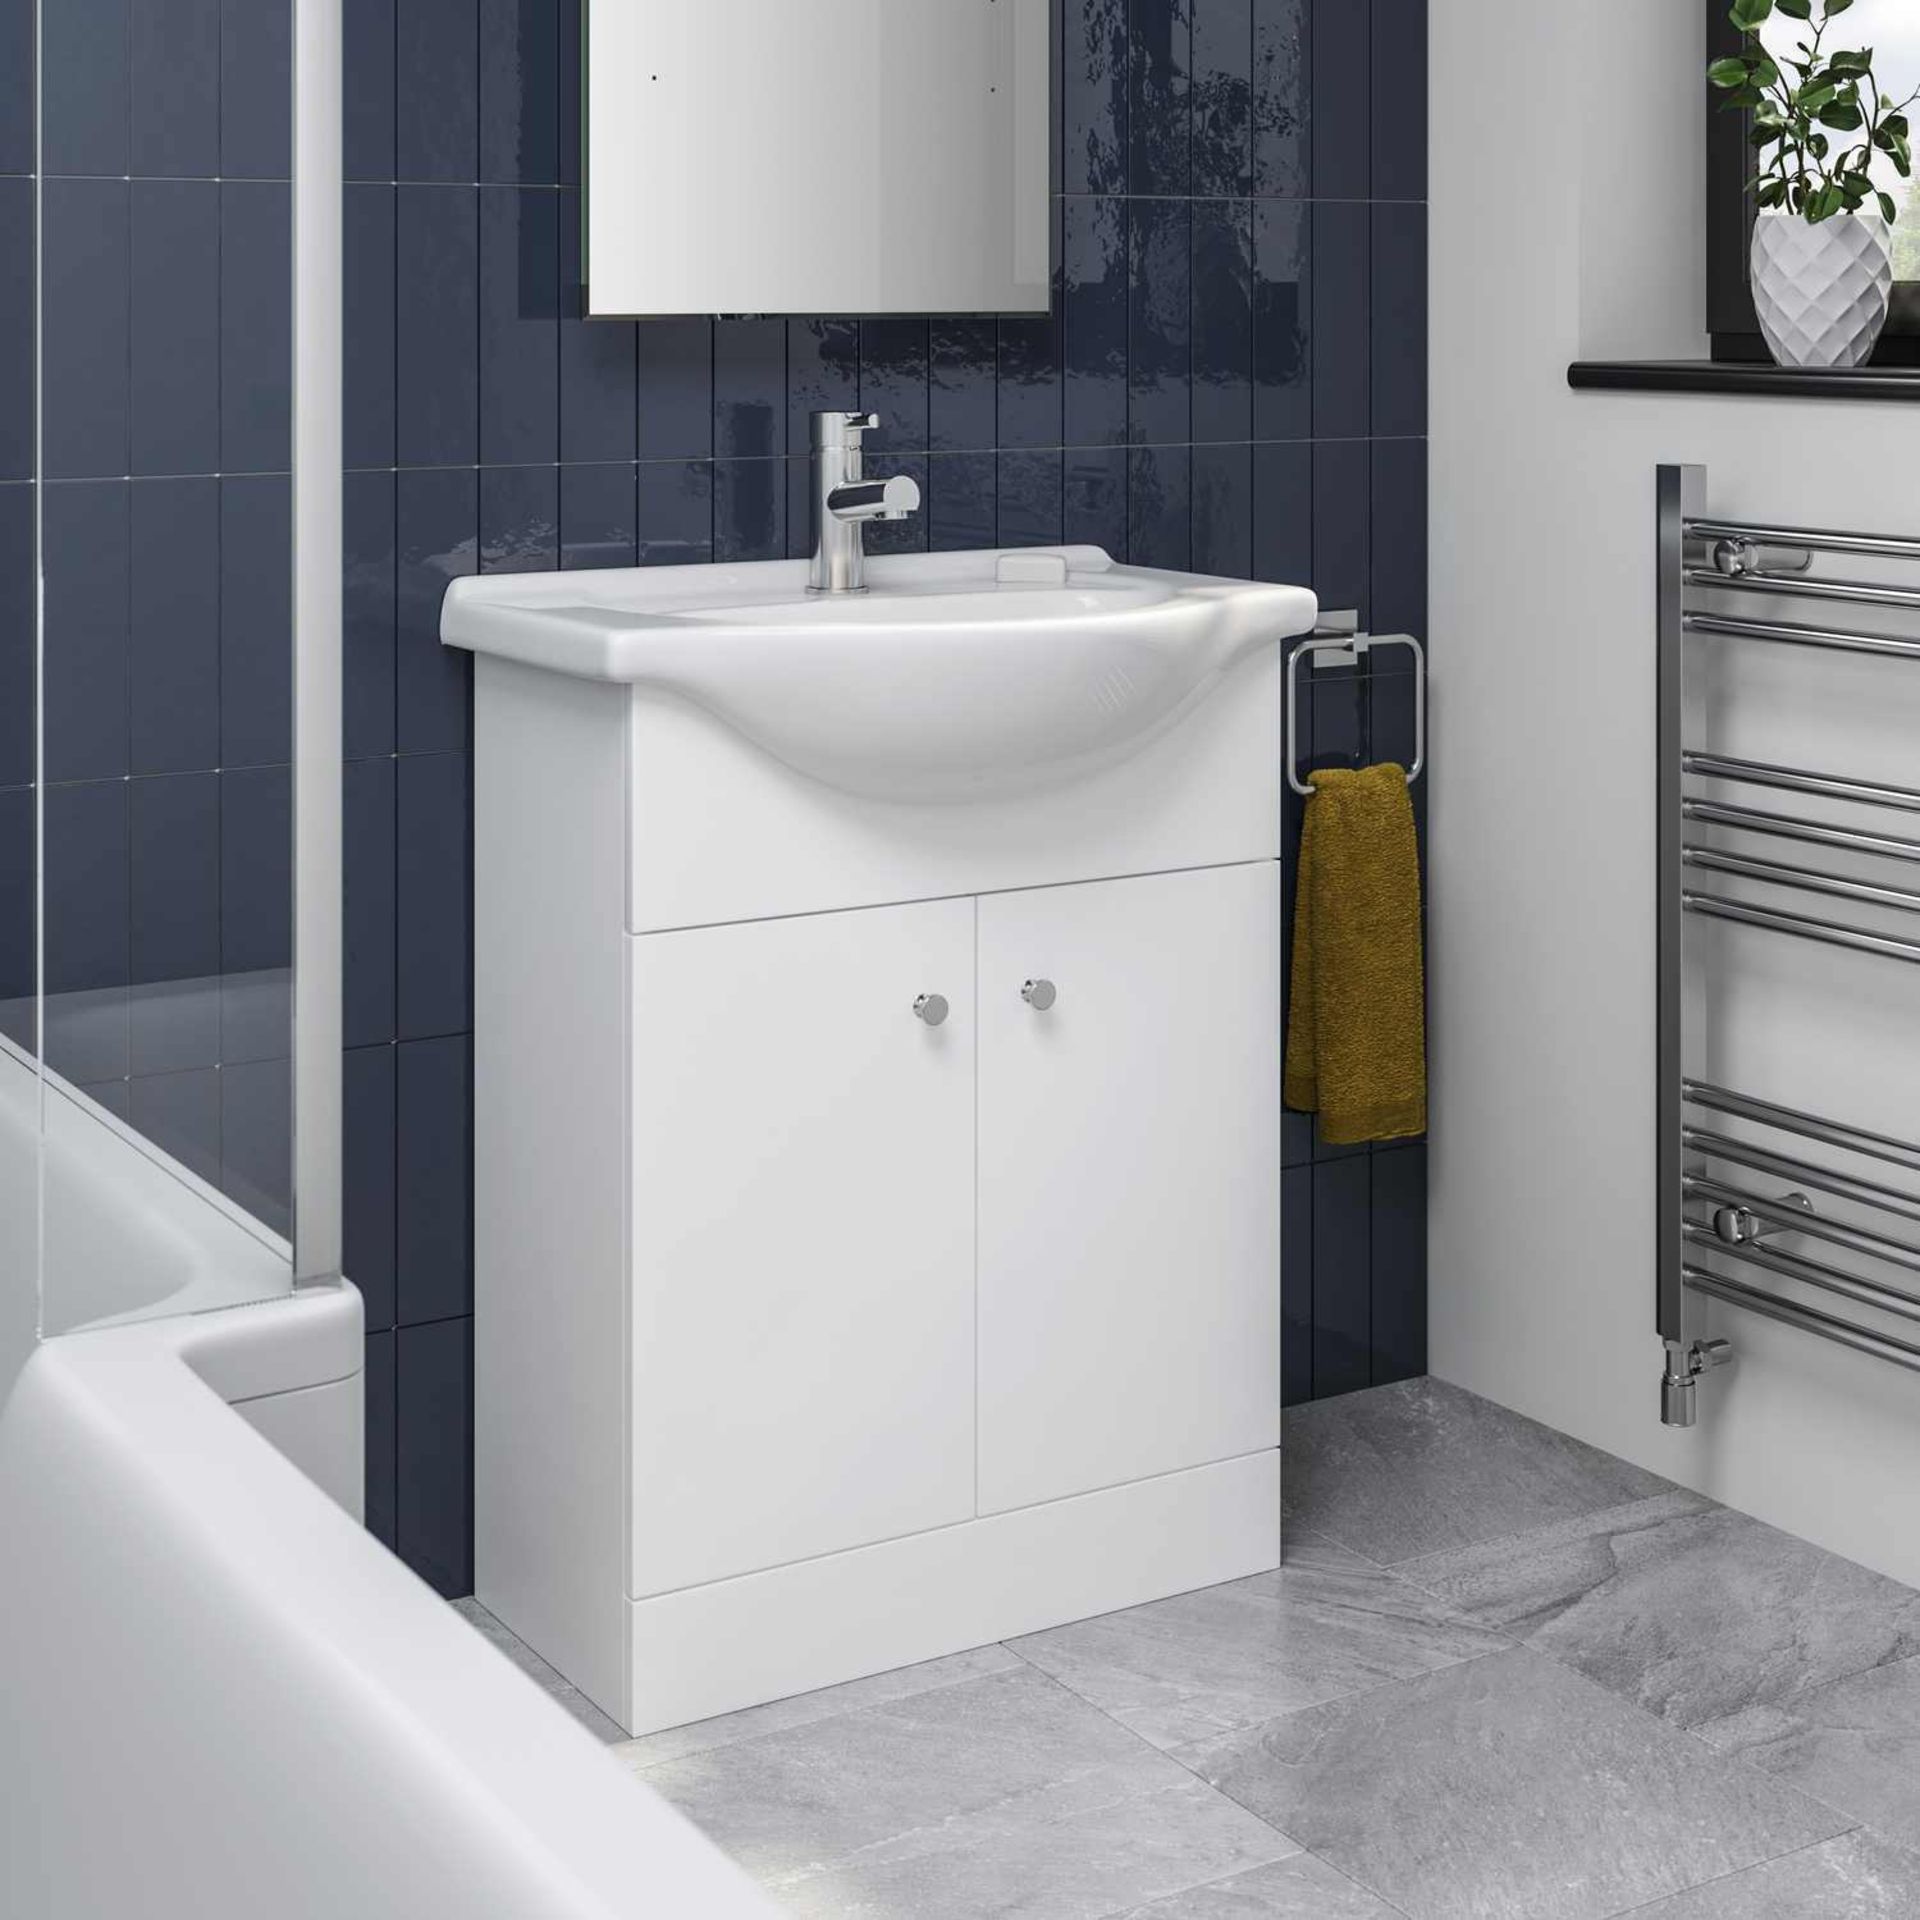 NEW & BOXED 650mm Quartz White Basin Vanity Unit- Floor Standing. RRP £399.99.Comes complete... - Image 2 of 3